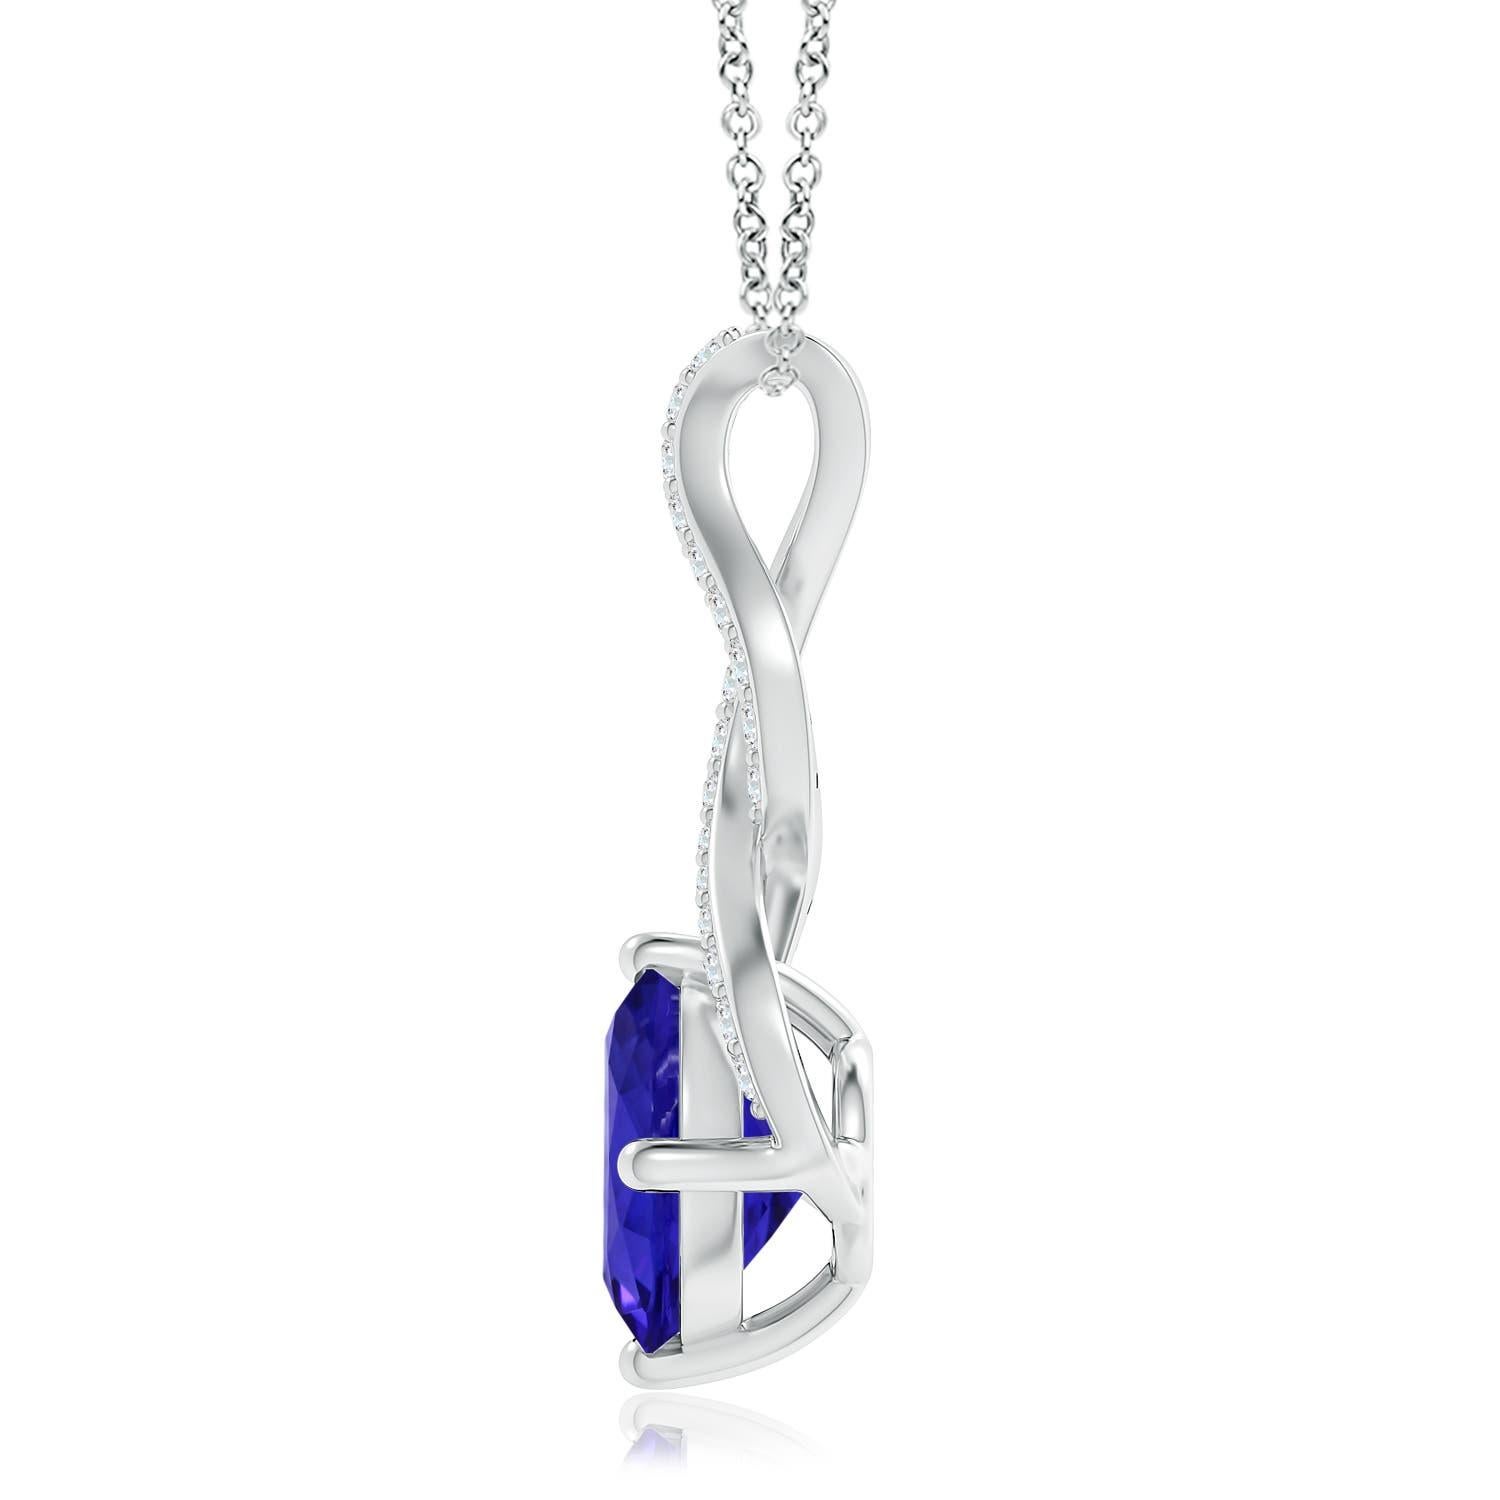 A beautiful interpretation of the iconic infinity sign, this 14k white gold tanzanite pendant features a dazzling infinity-shaped bale. The prong-set GIA certified tanzanite is accentuated by the brilliant diamonds on the twisted bale.
